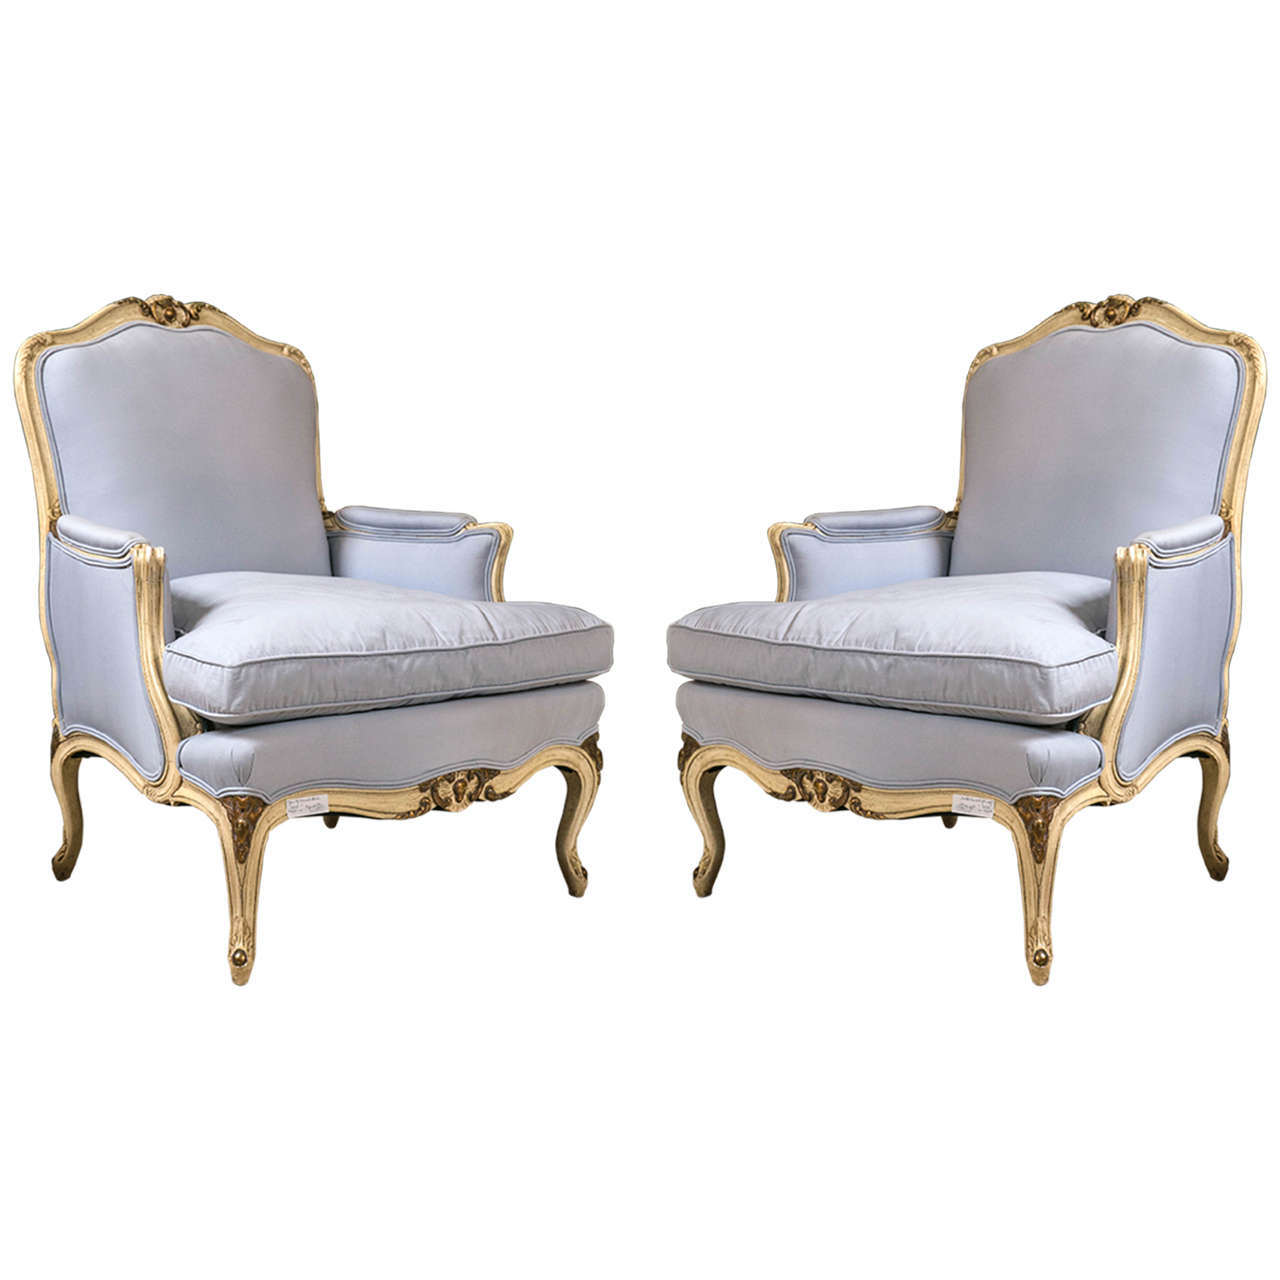 Pair of Louis XV Styled Bergere Chairs in the Manner of Maison Jansen